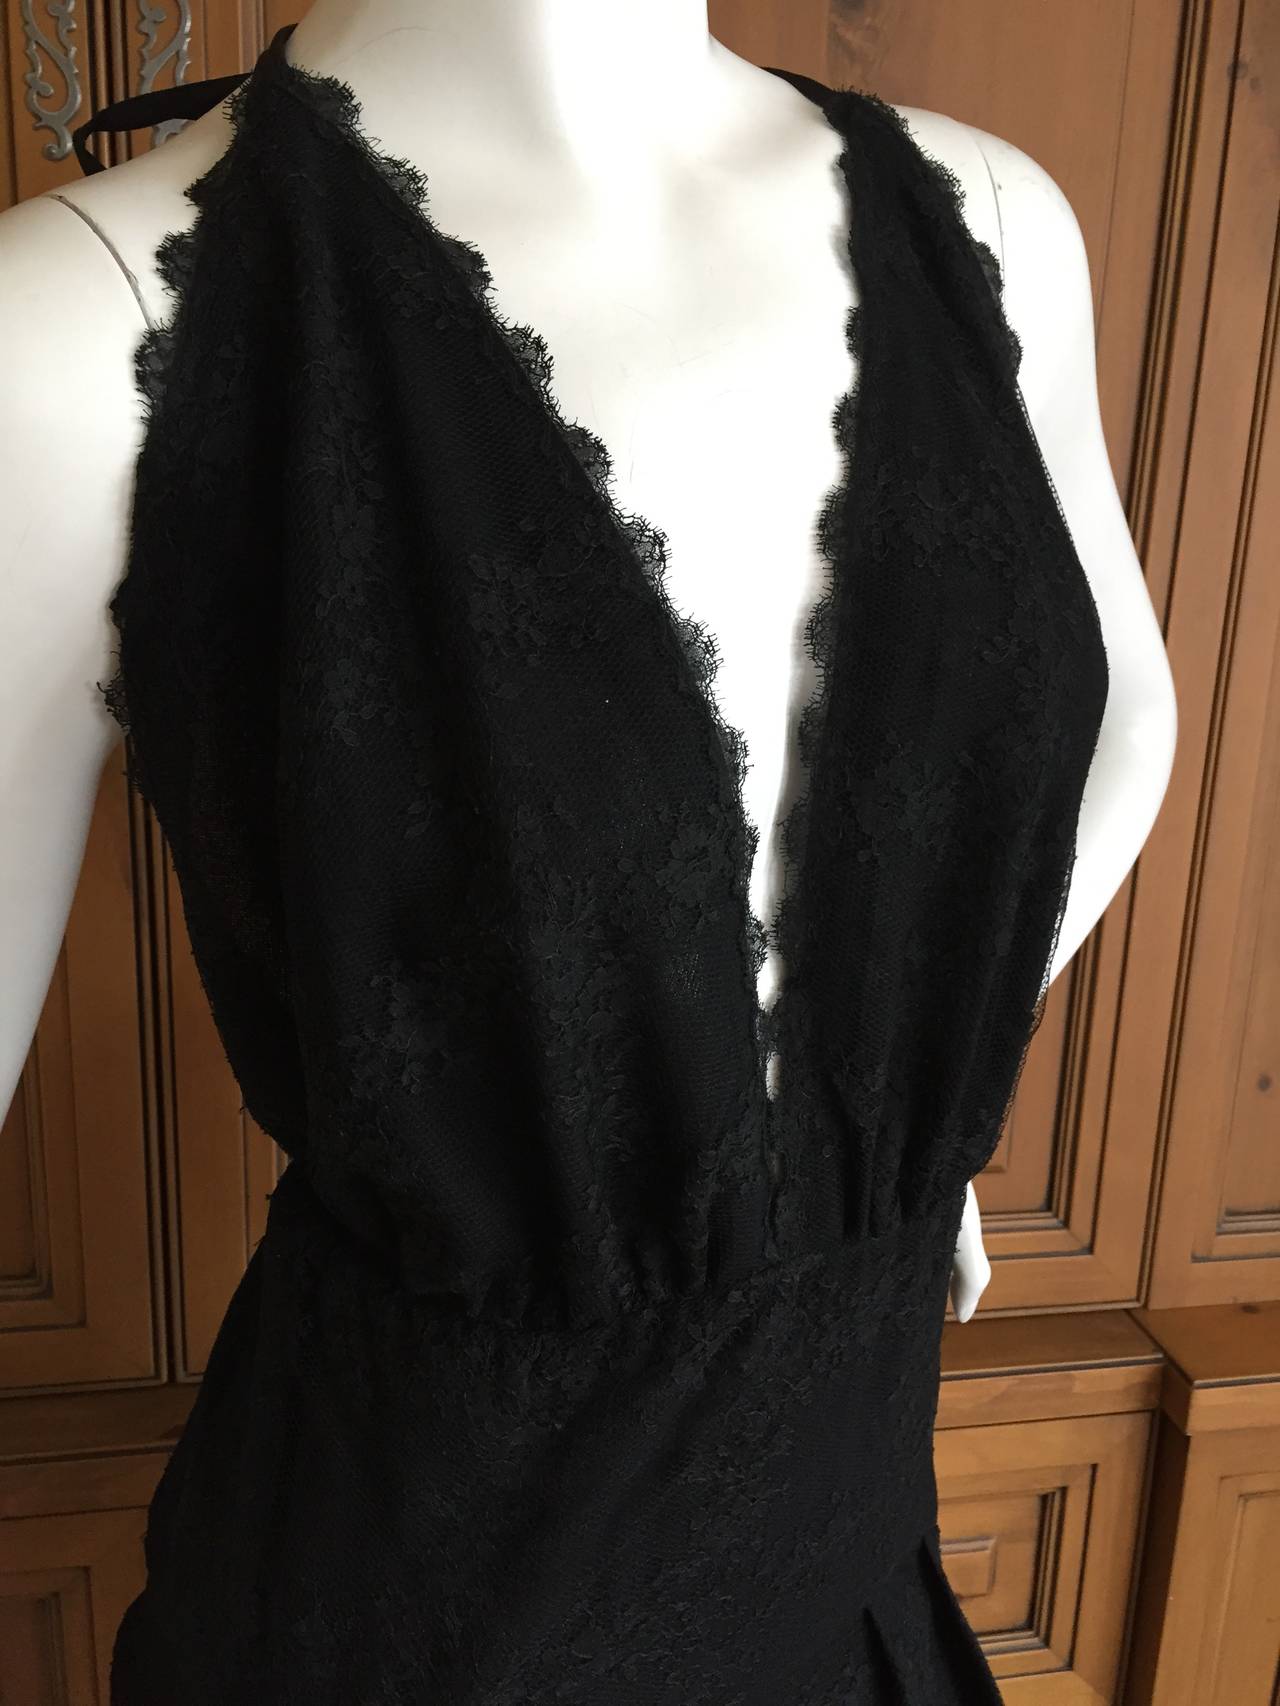 Galanos Backless Halter Black Lace Cocktail Dress In Excellent Condition For Sale In Cloverdale, CA